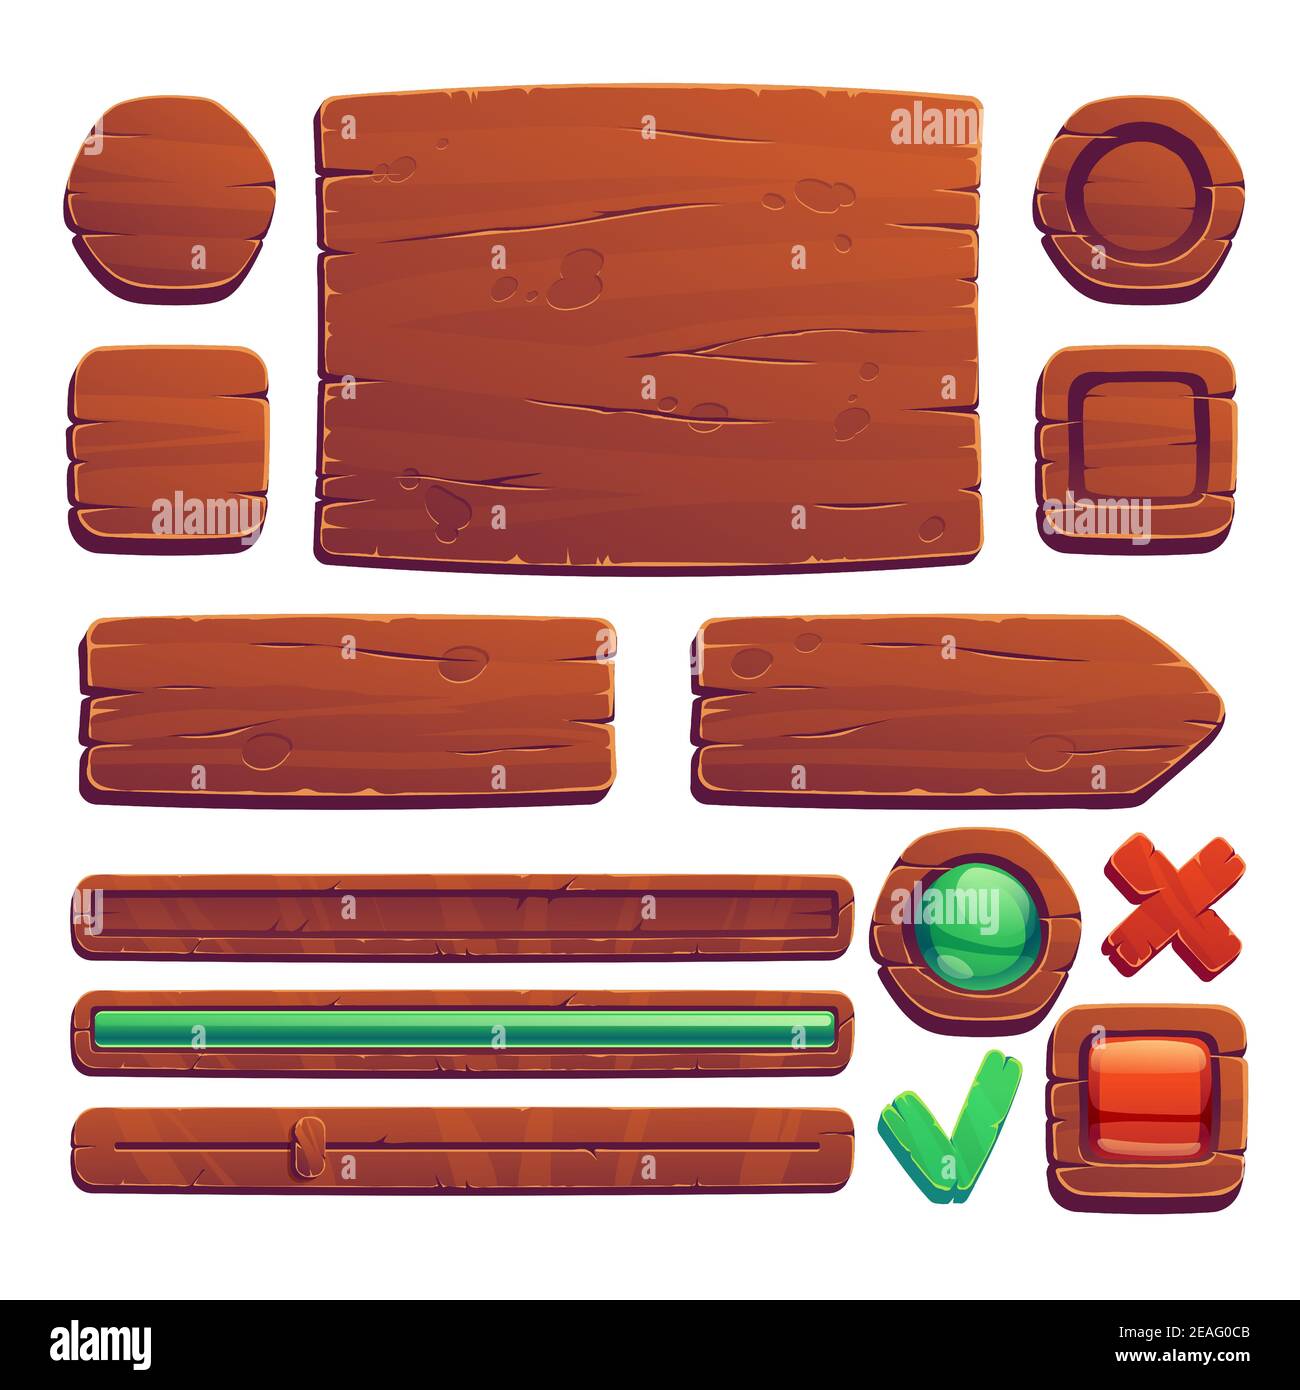 Wooden game buttons, cartoon game interface of wood texture, menu boards,  ui or gui design elements.